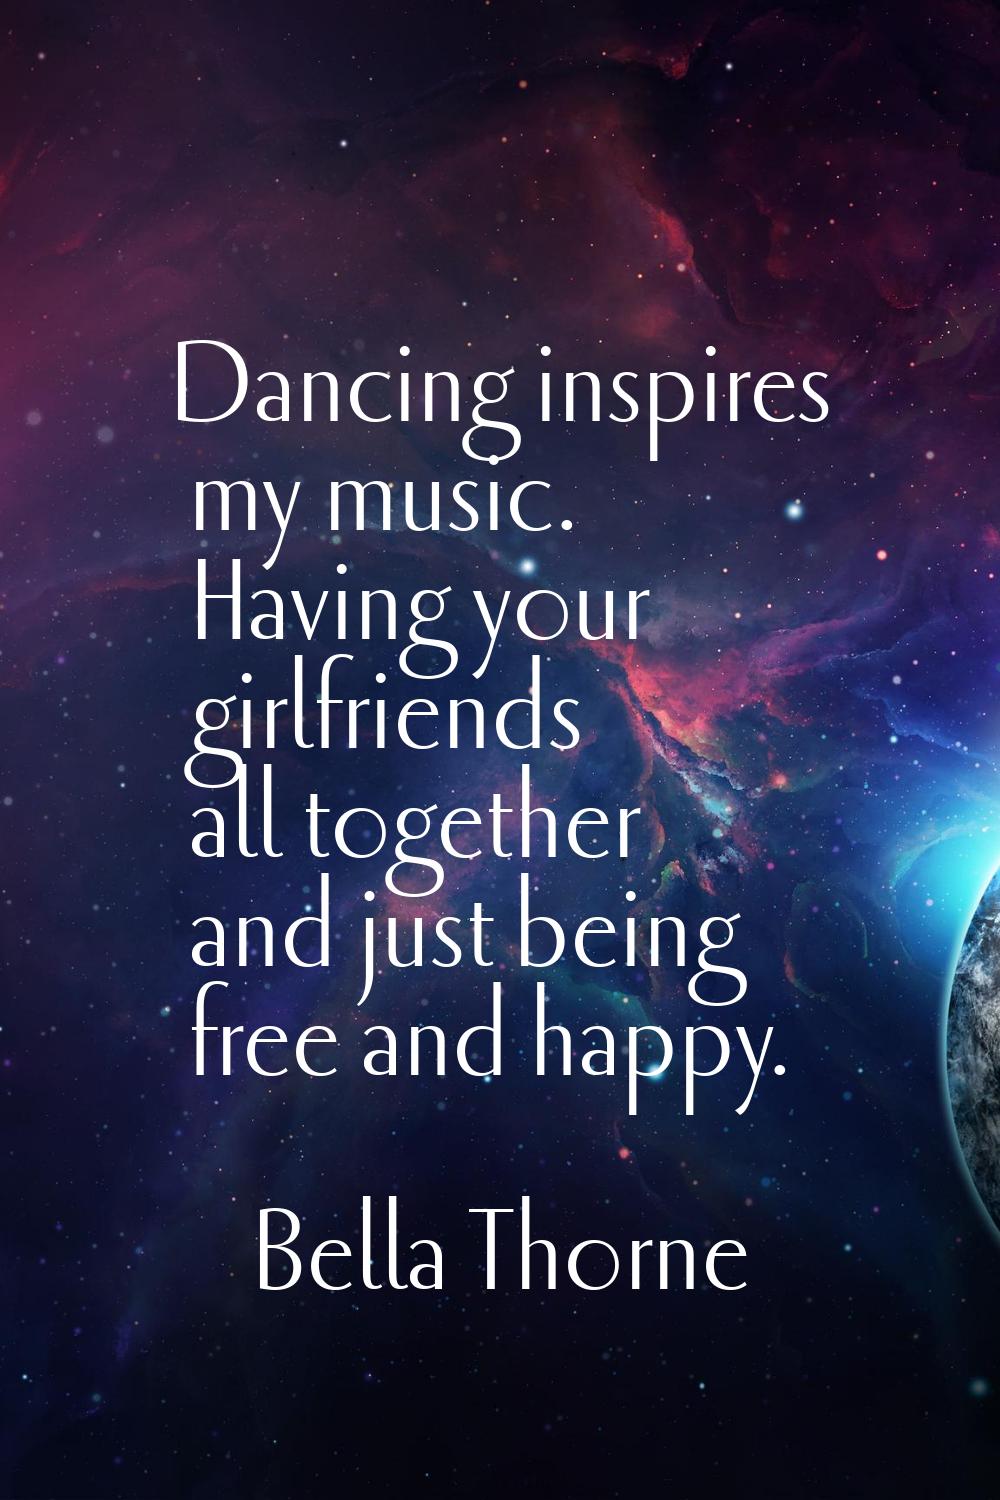 Dancing inspires my music. Having your girlfriends all together and just being free and happy.